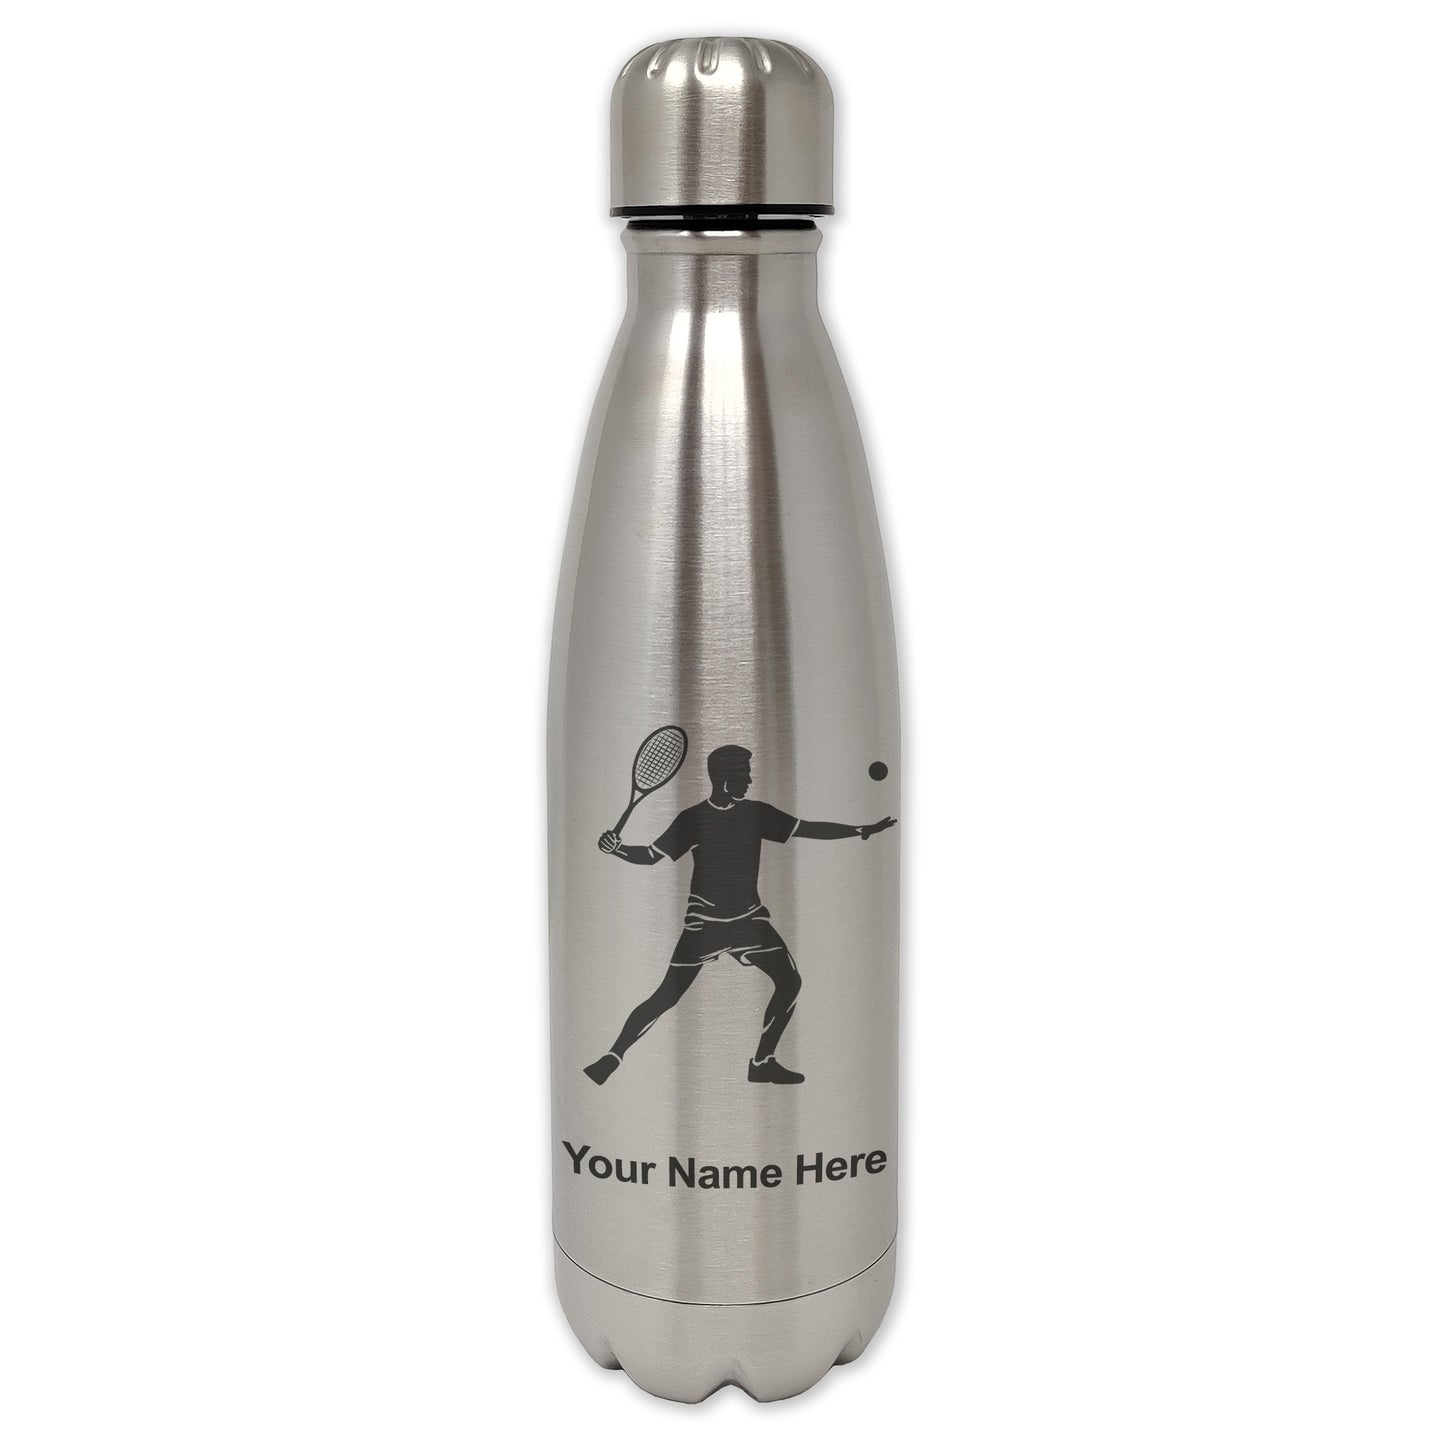 LaserGram Single Wall Water Bottle, Tennis Player Man, Personalized Engraving Included